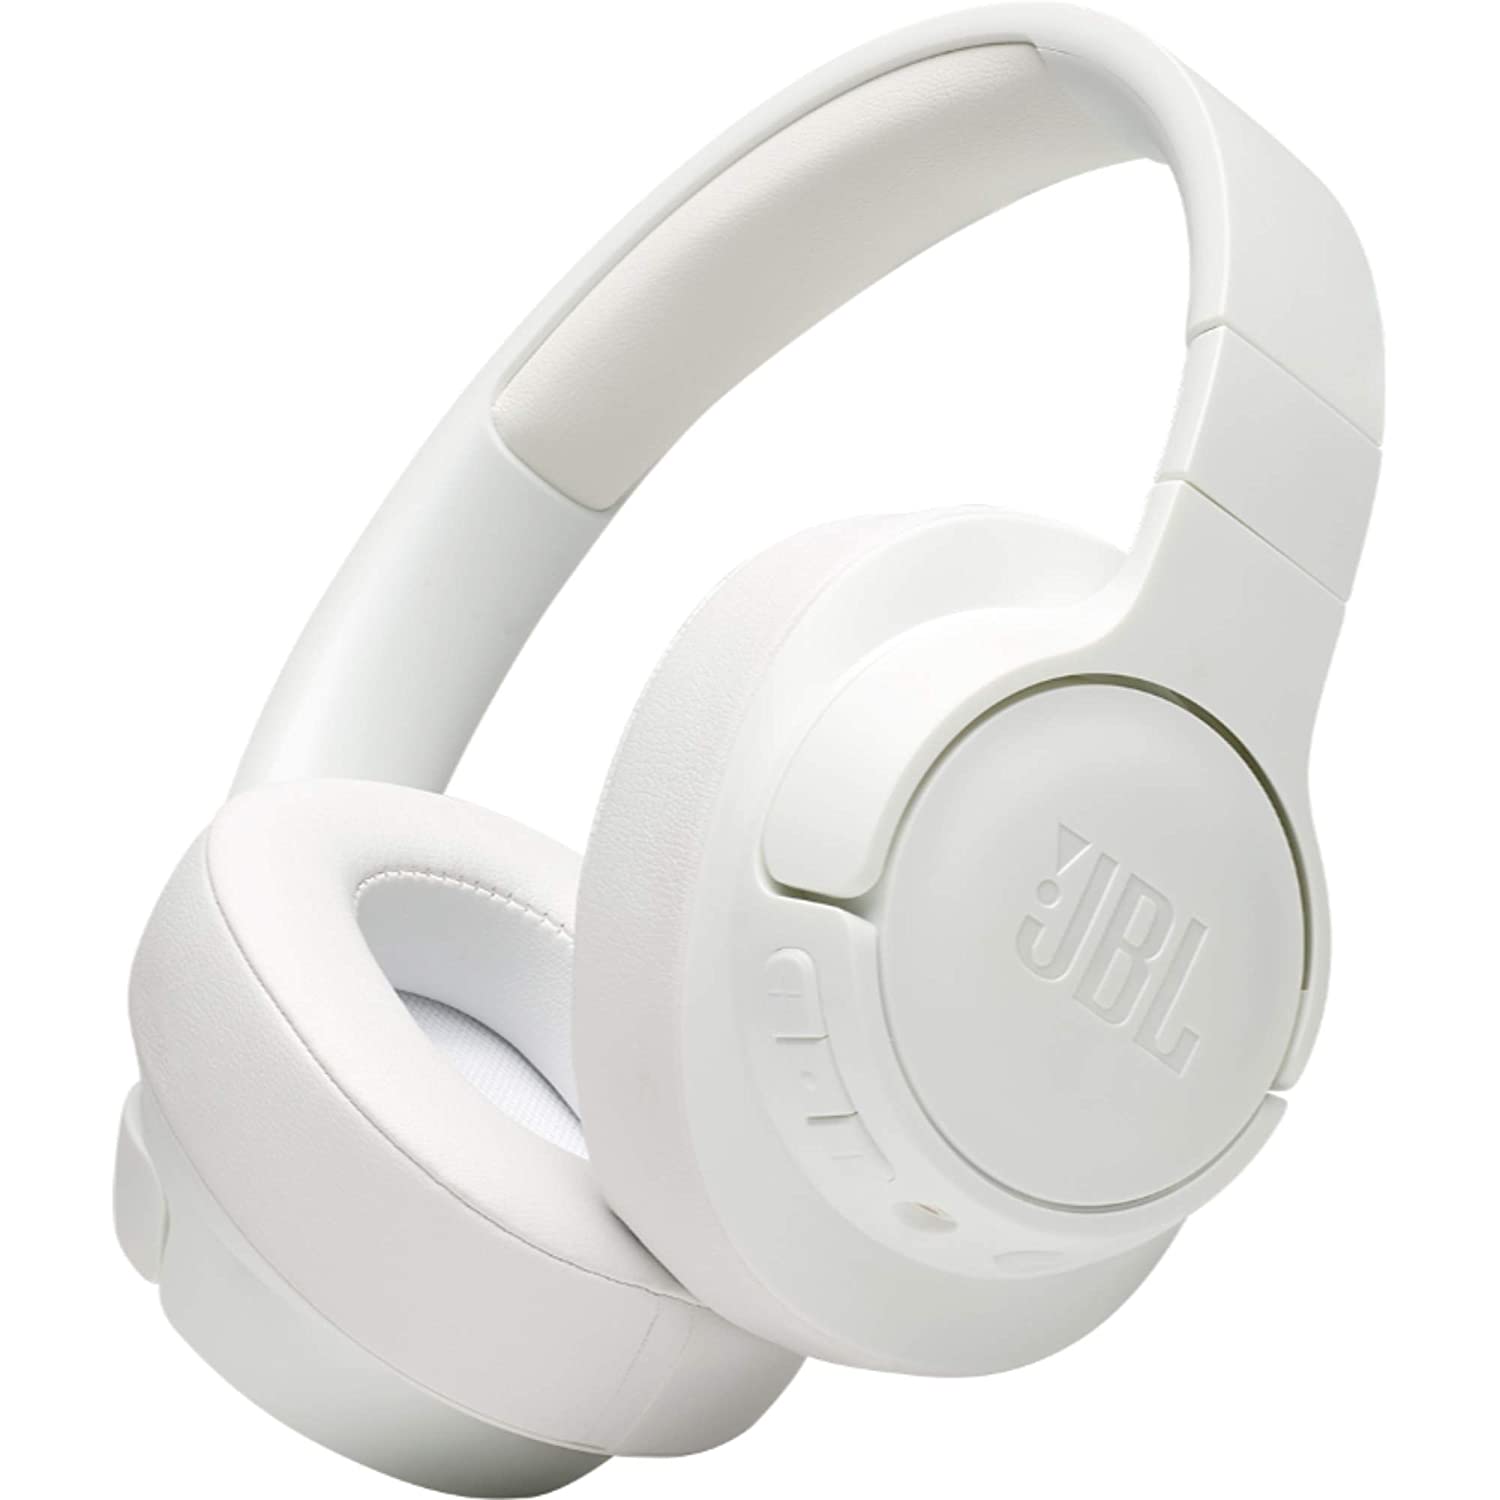 JBL Tune 700BT by Harman, 27-Hours Playtime with Quick Charging, Wireless Over Ear Headphones with Mic, Dual Pairing, AUX & Voice Assistant Support for Mobile Phones (White)